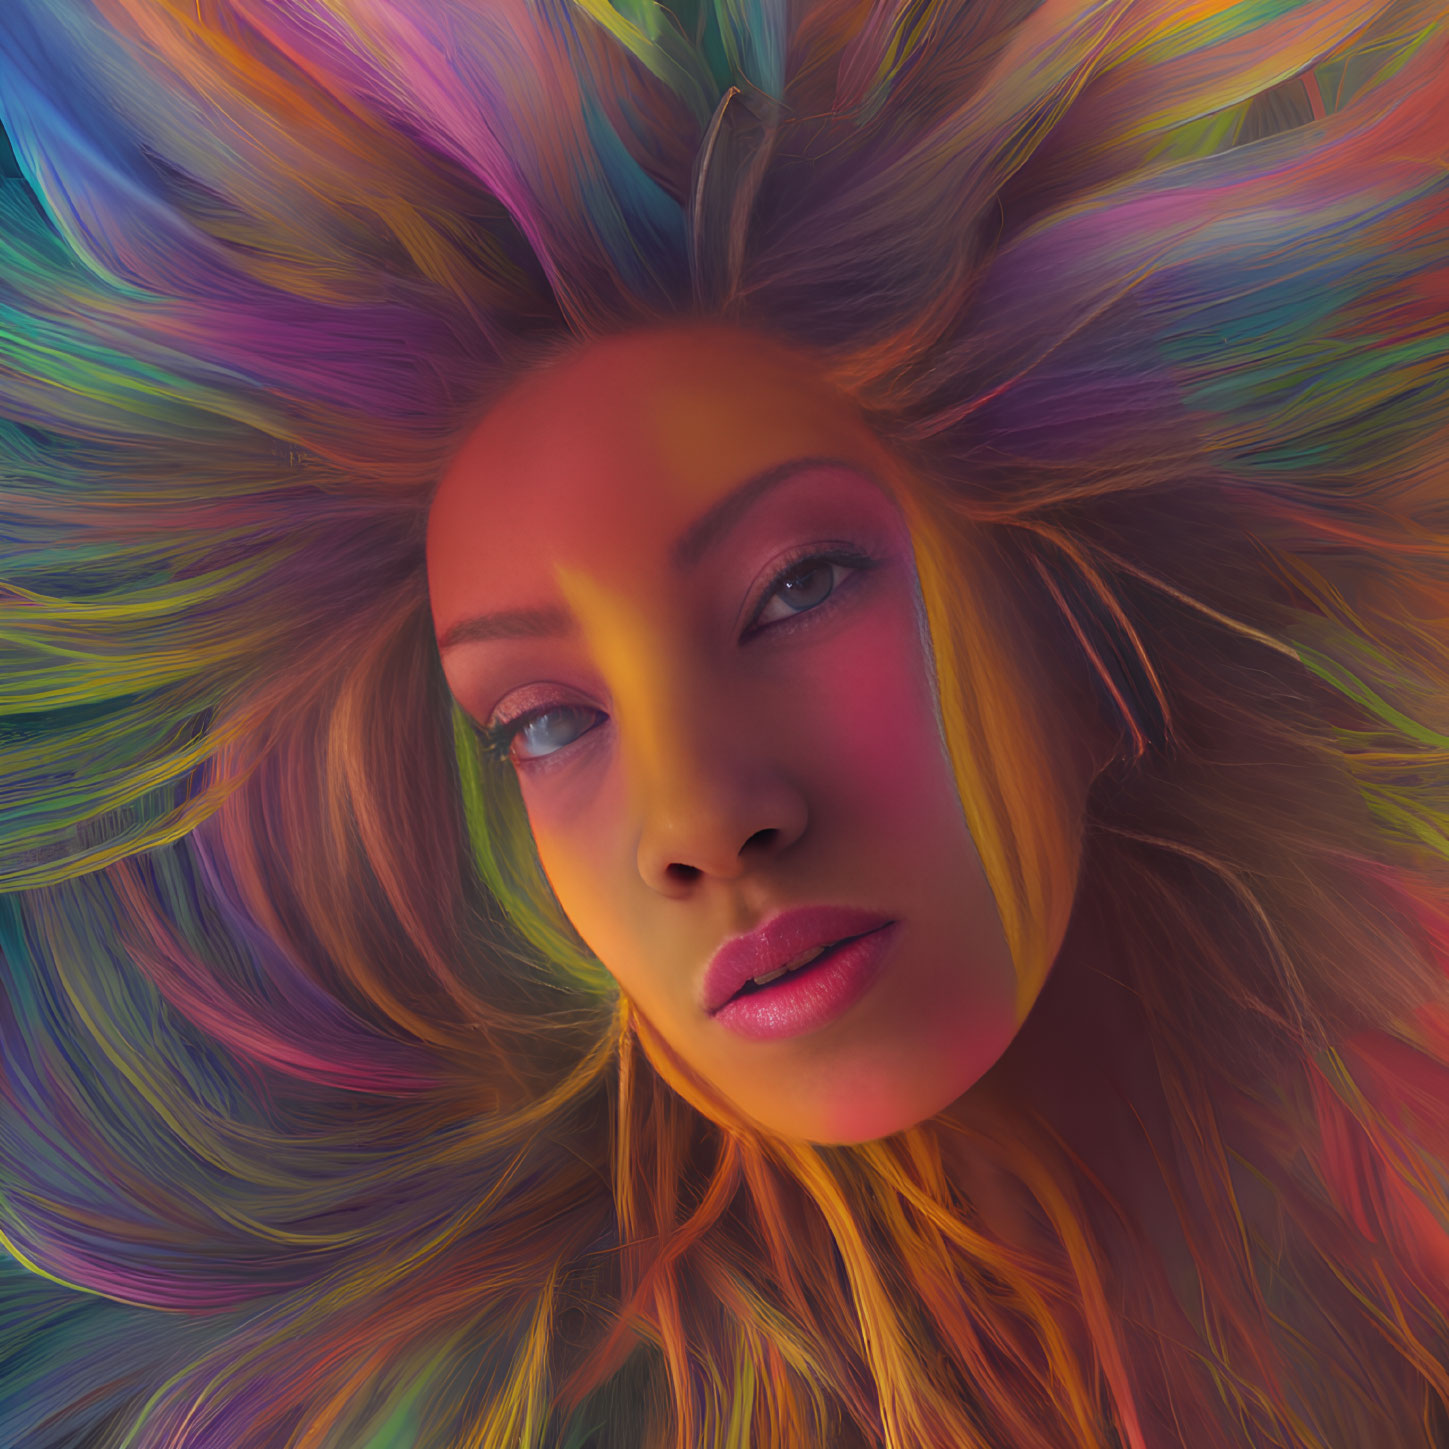 Colorful multi-colored hair on woman against vibrant background